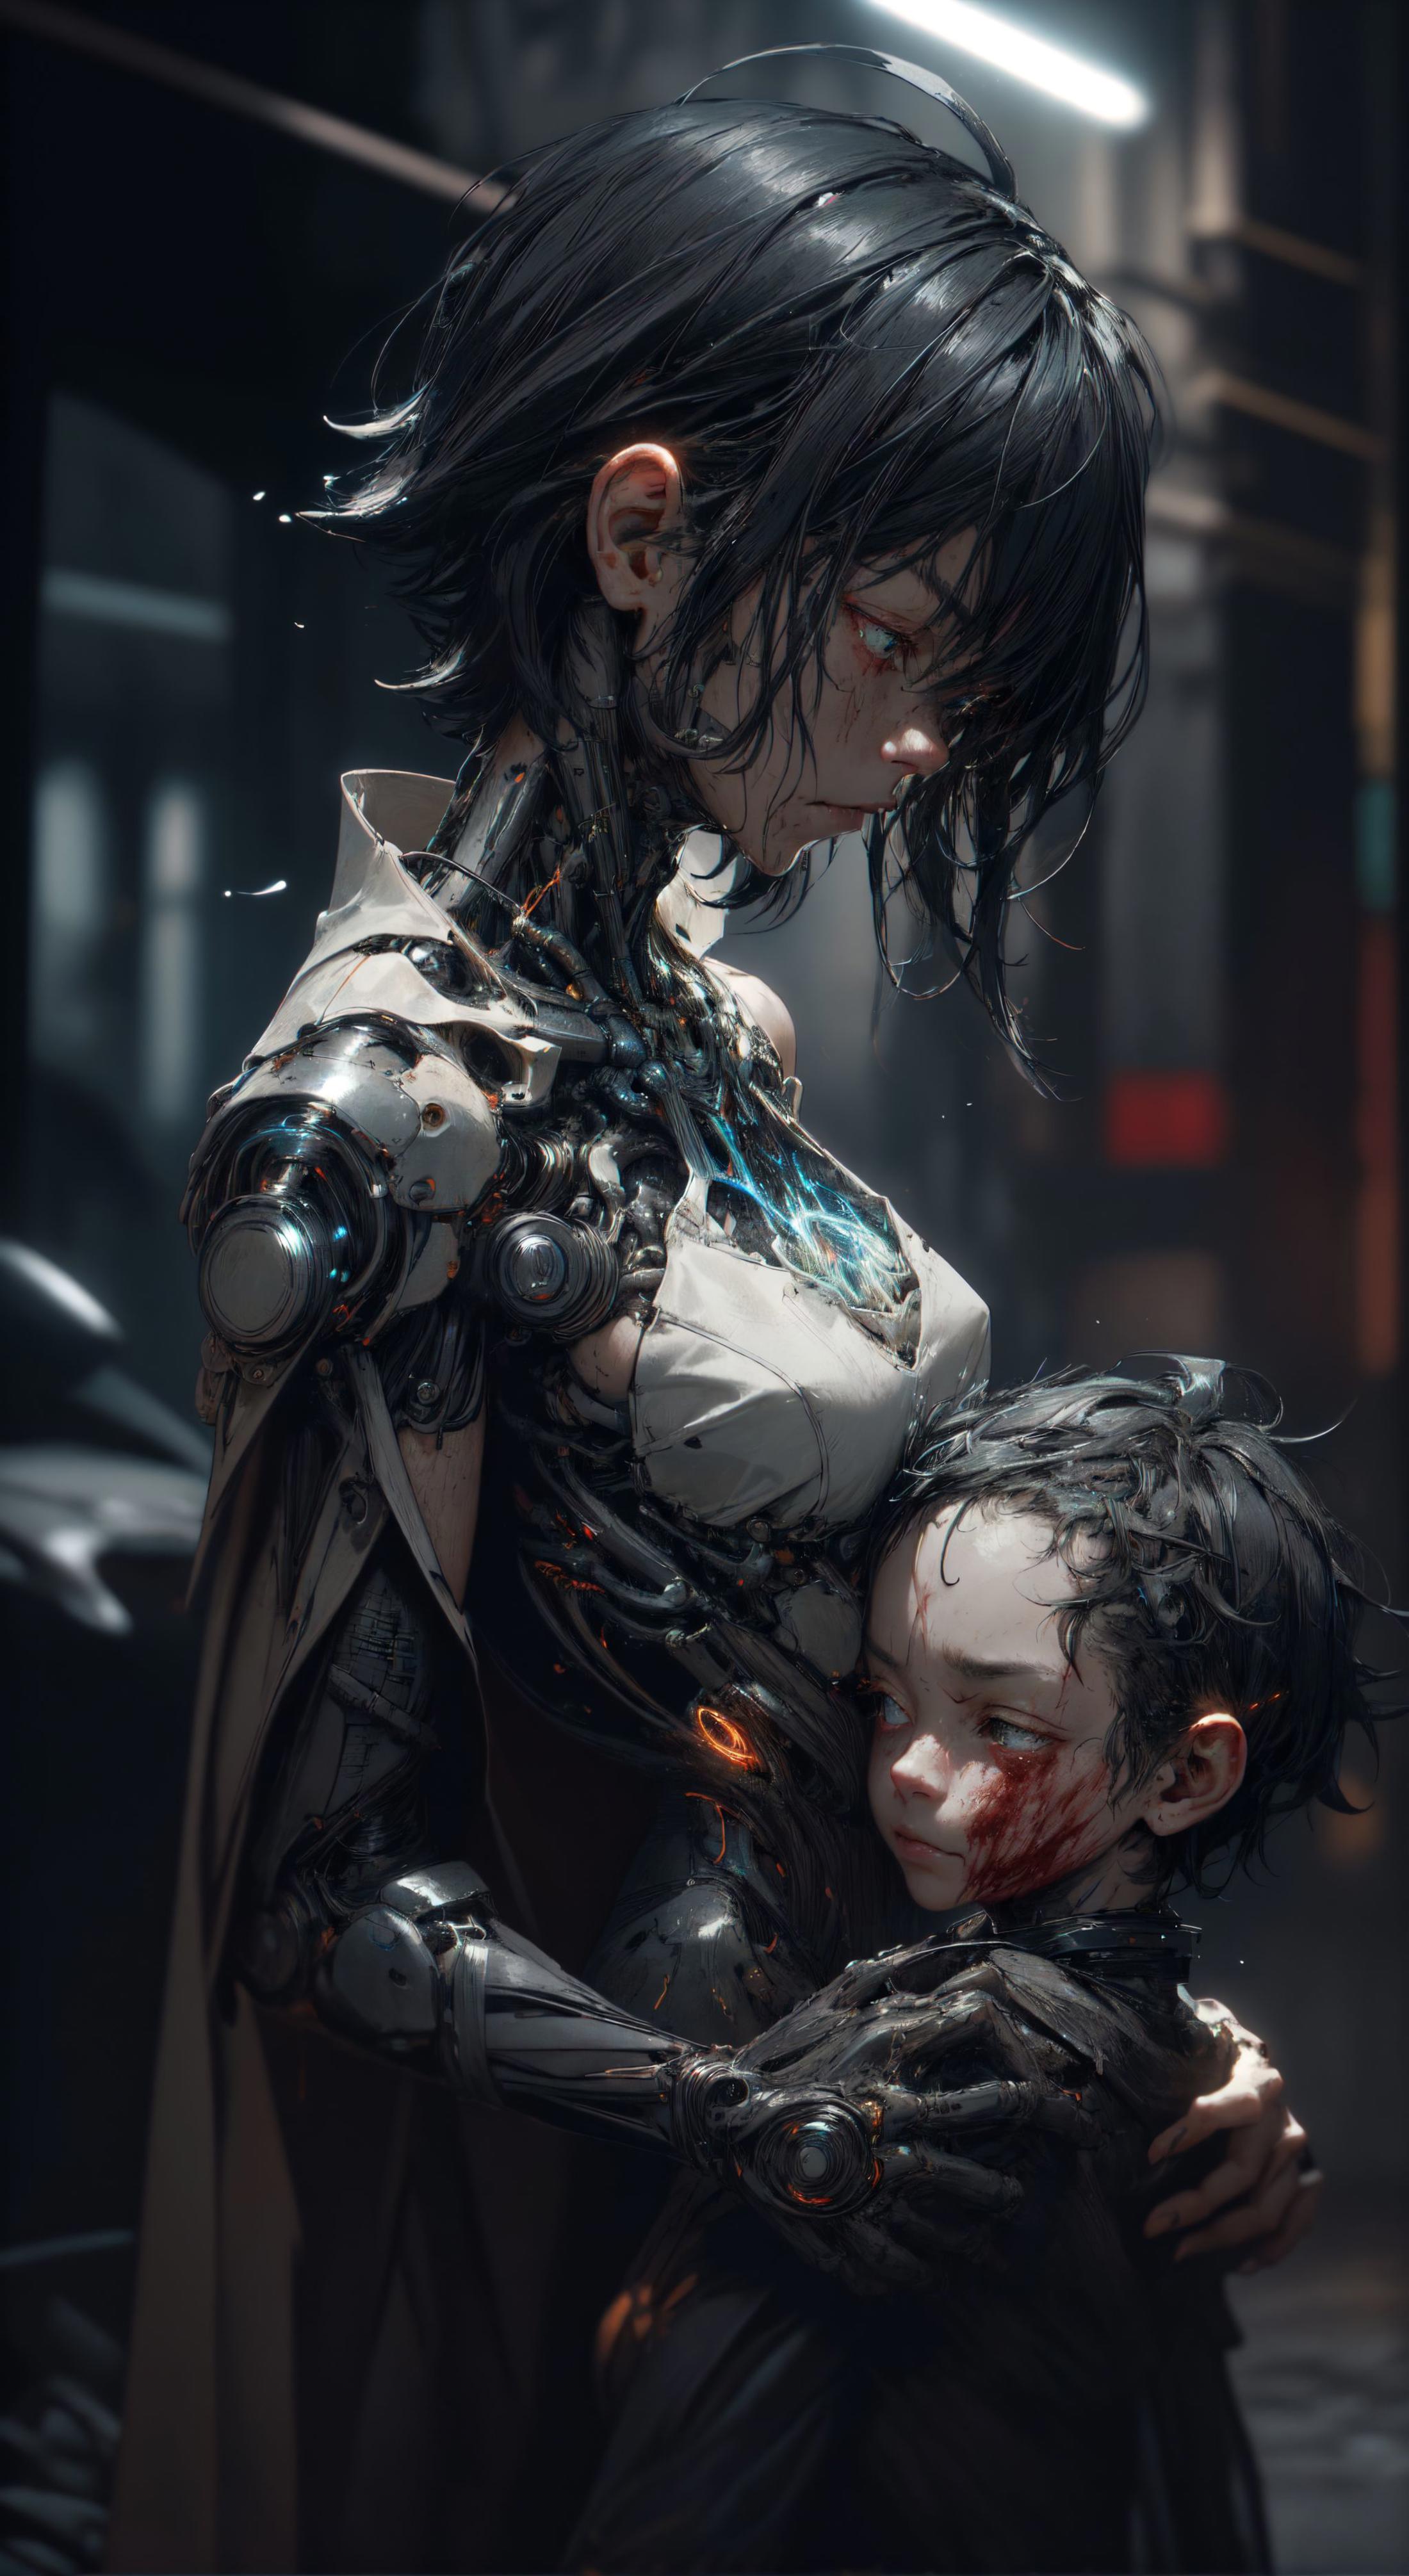 A robot woman holding a child with a bloody face.